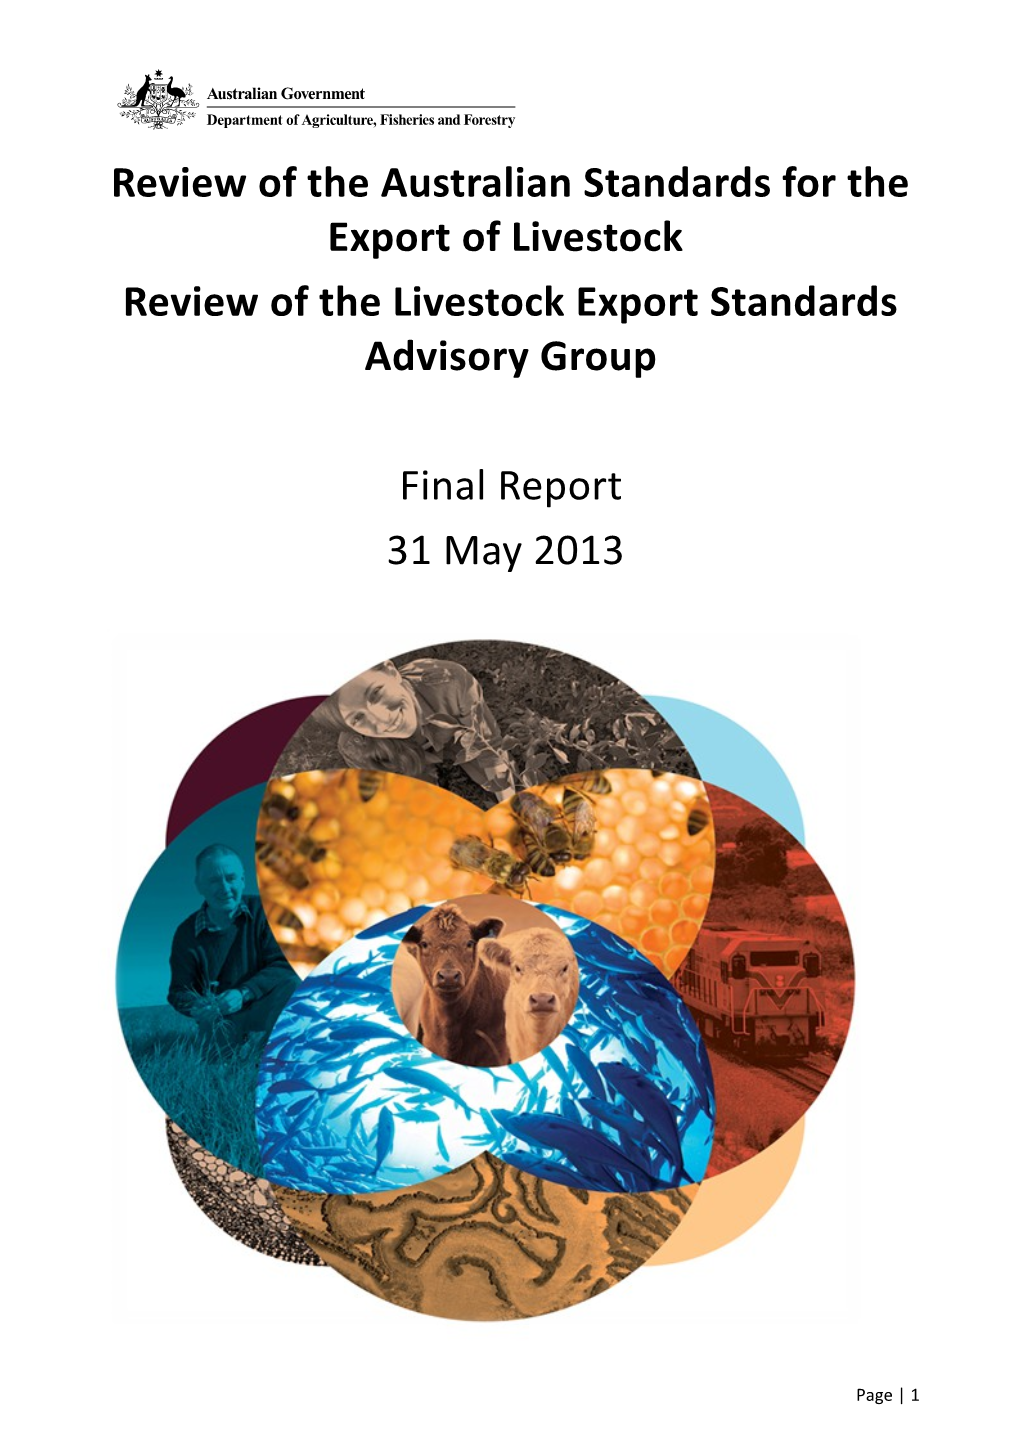 Review of the Australian Standards for the Export of Livestock